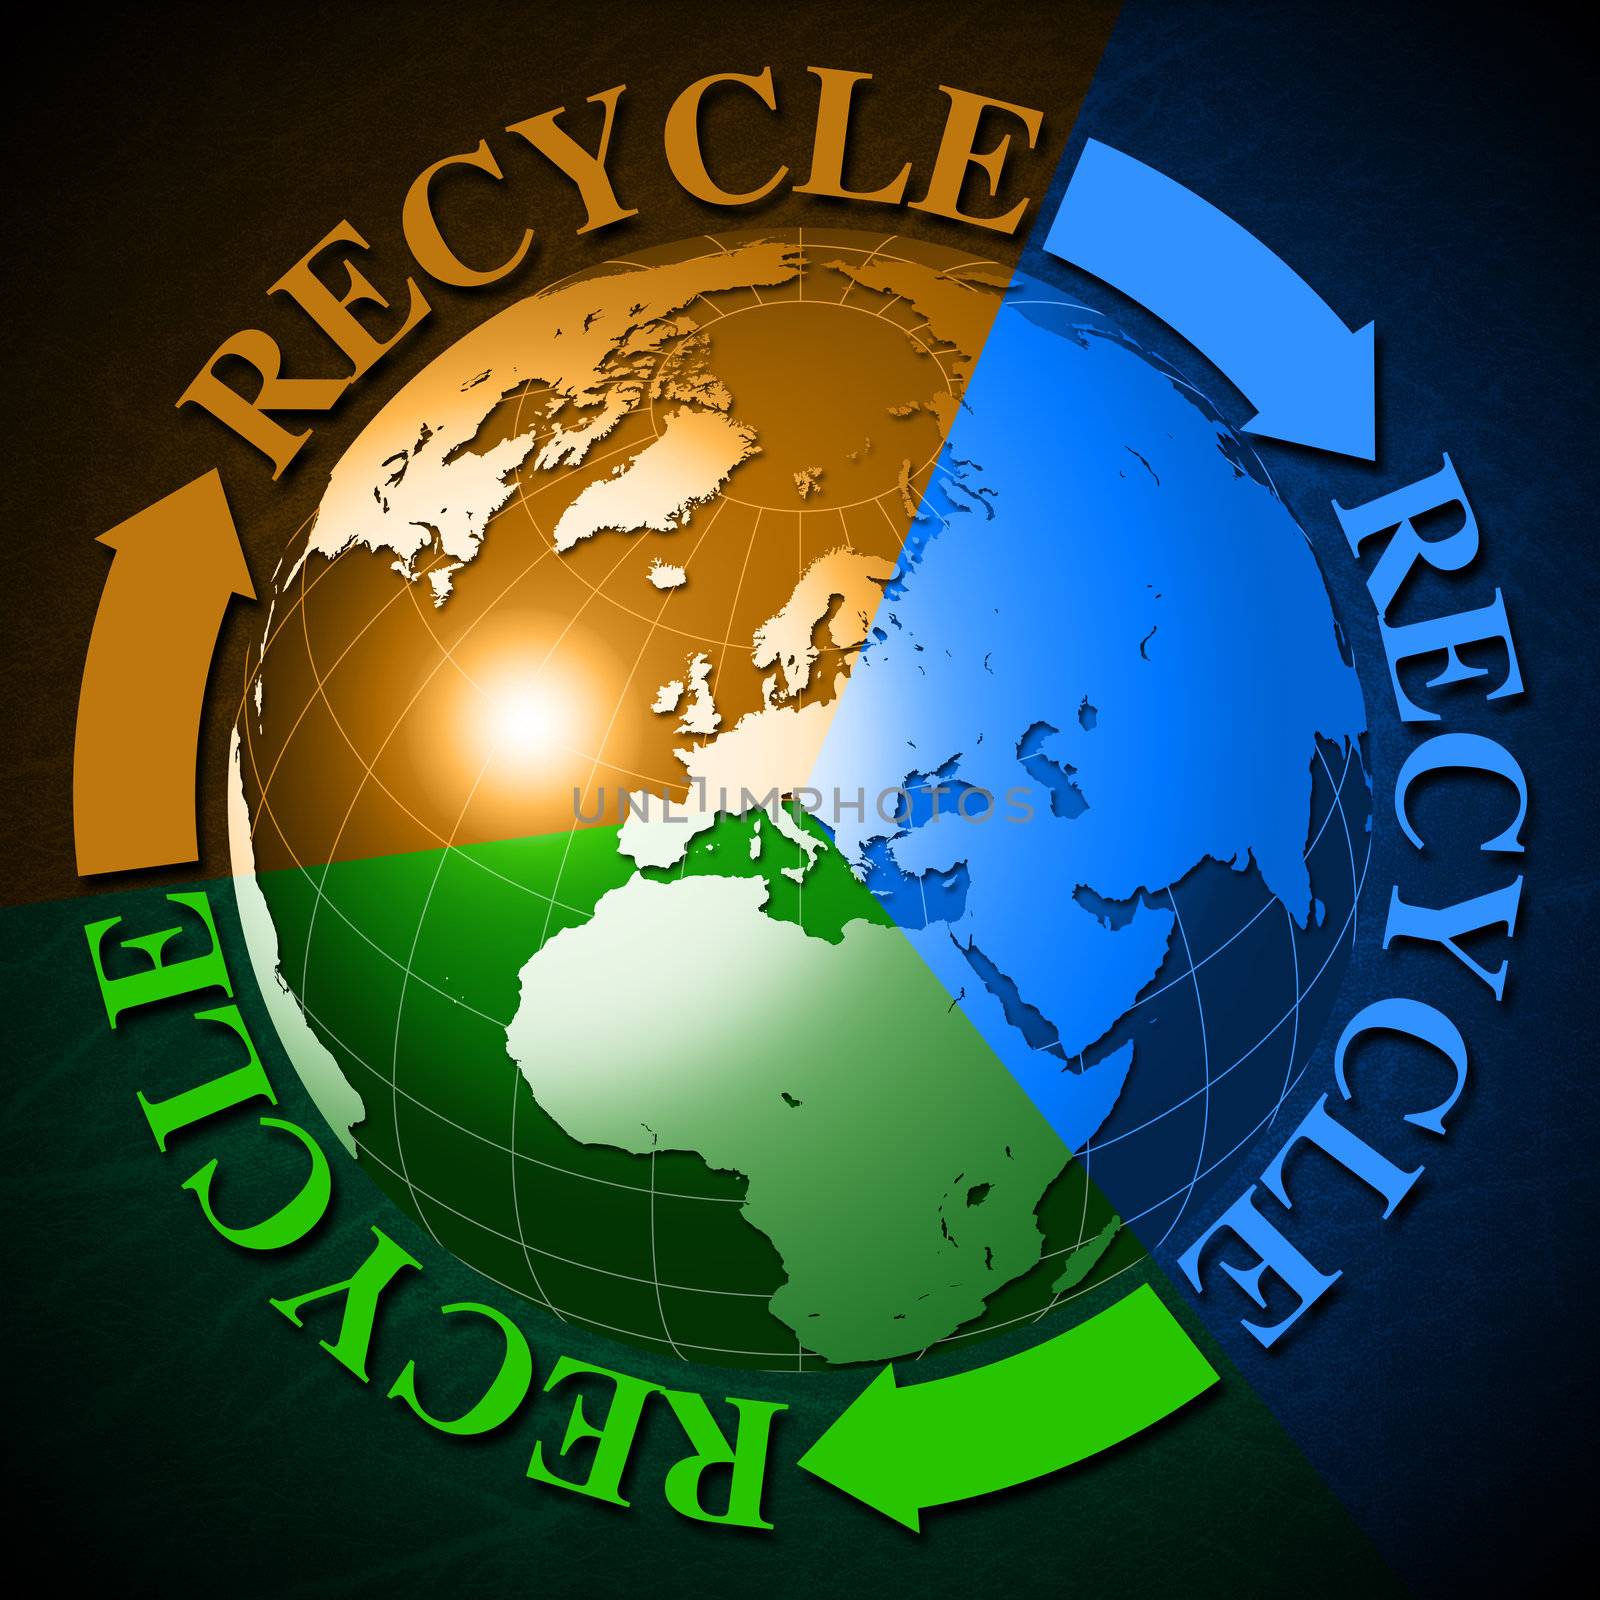 3d recycling symbol with Earth globe divided in 3 colors and the word recycle